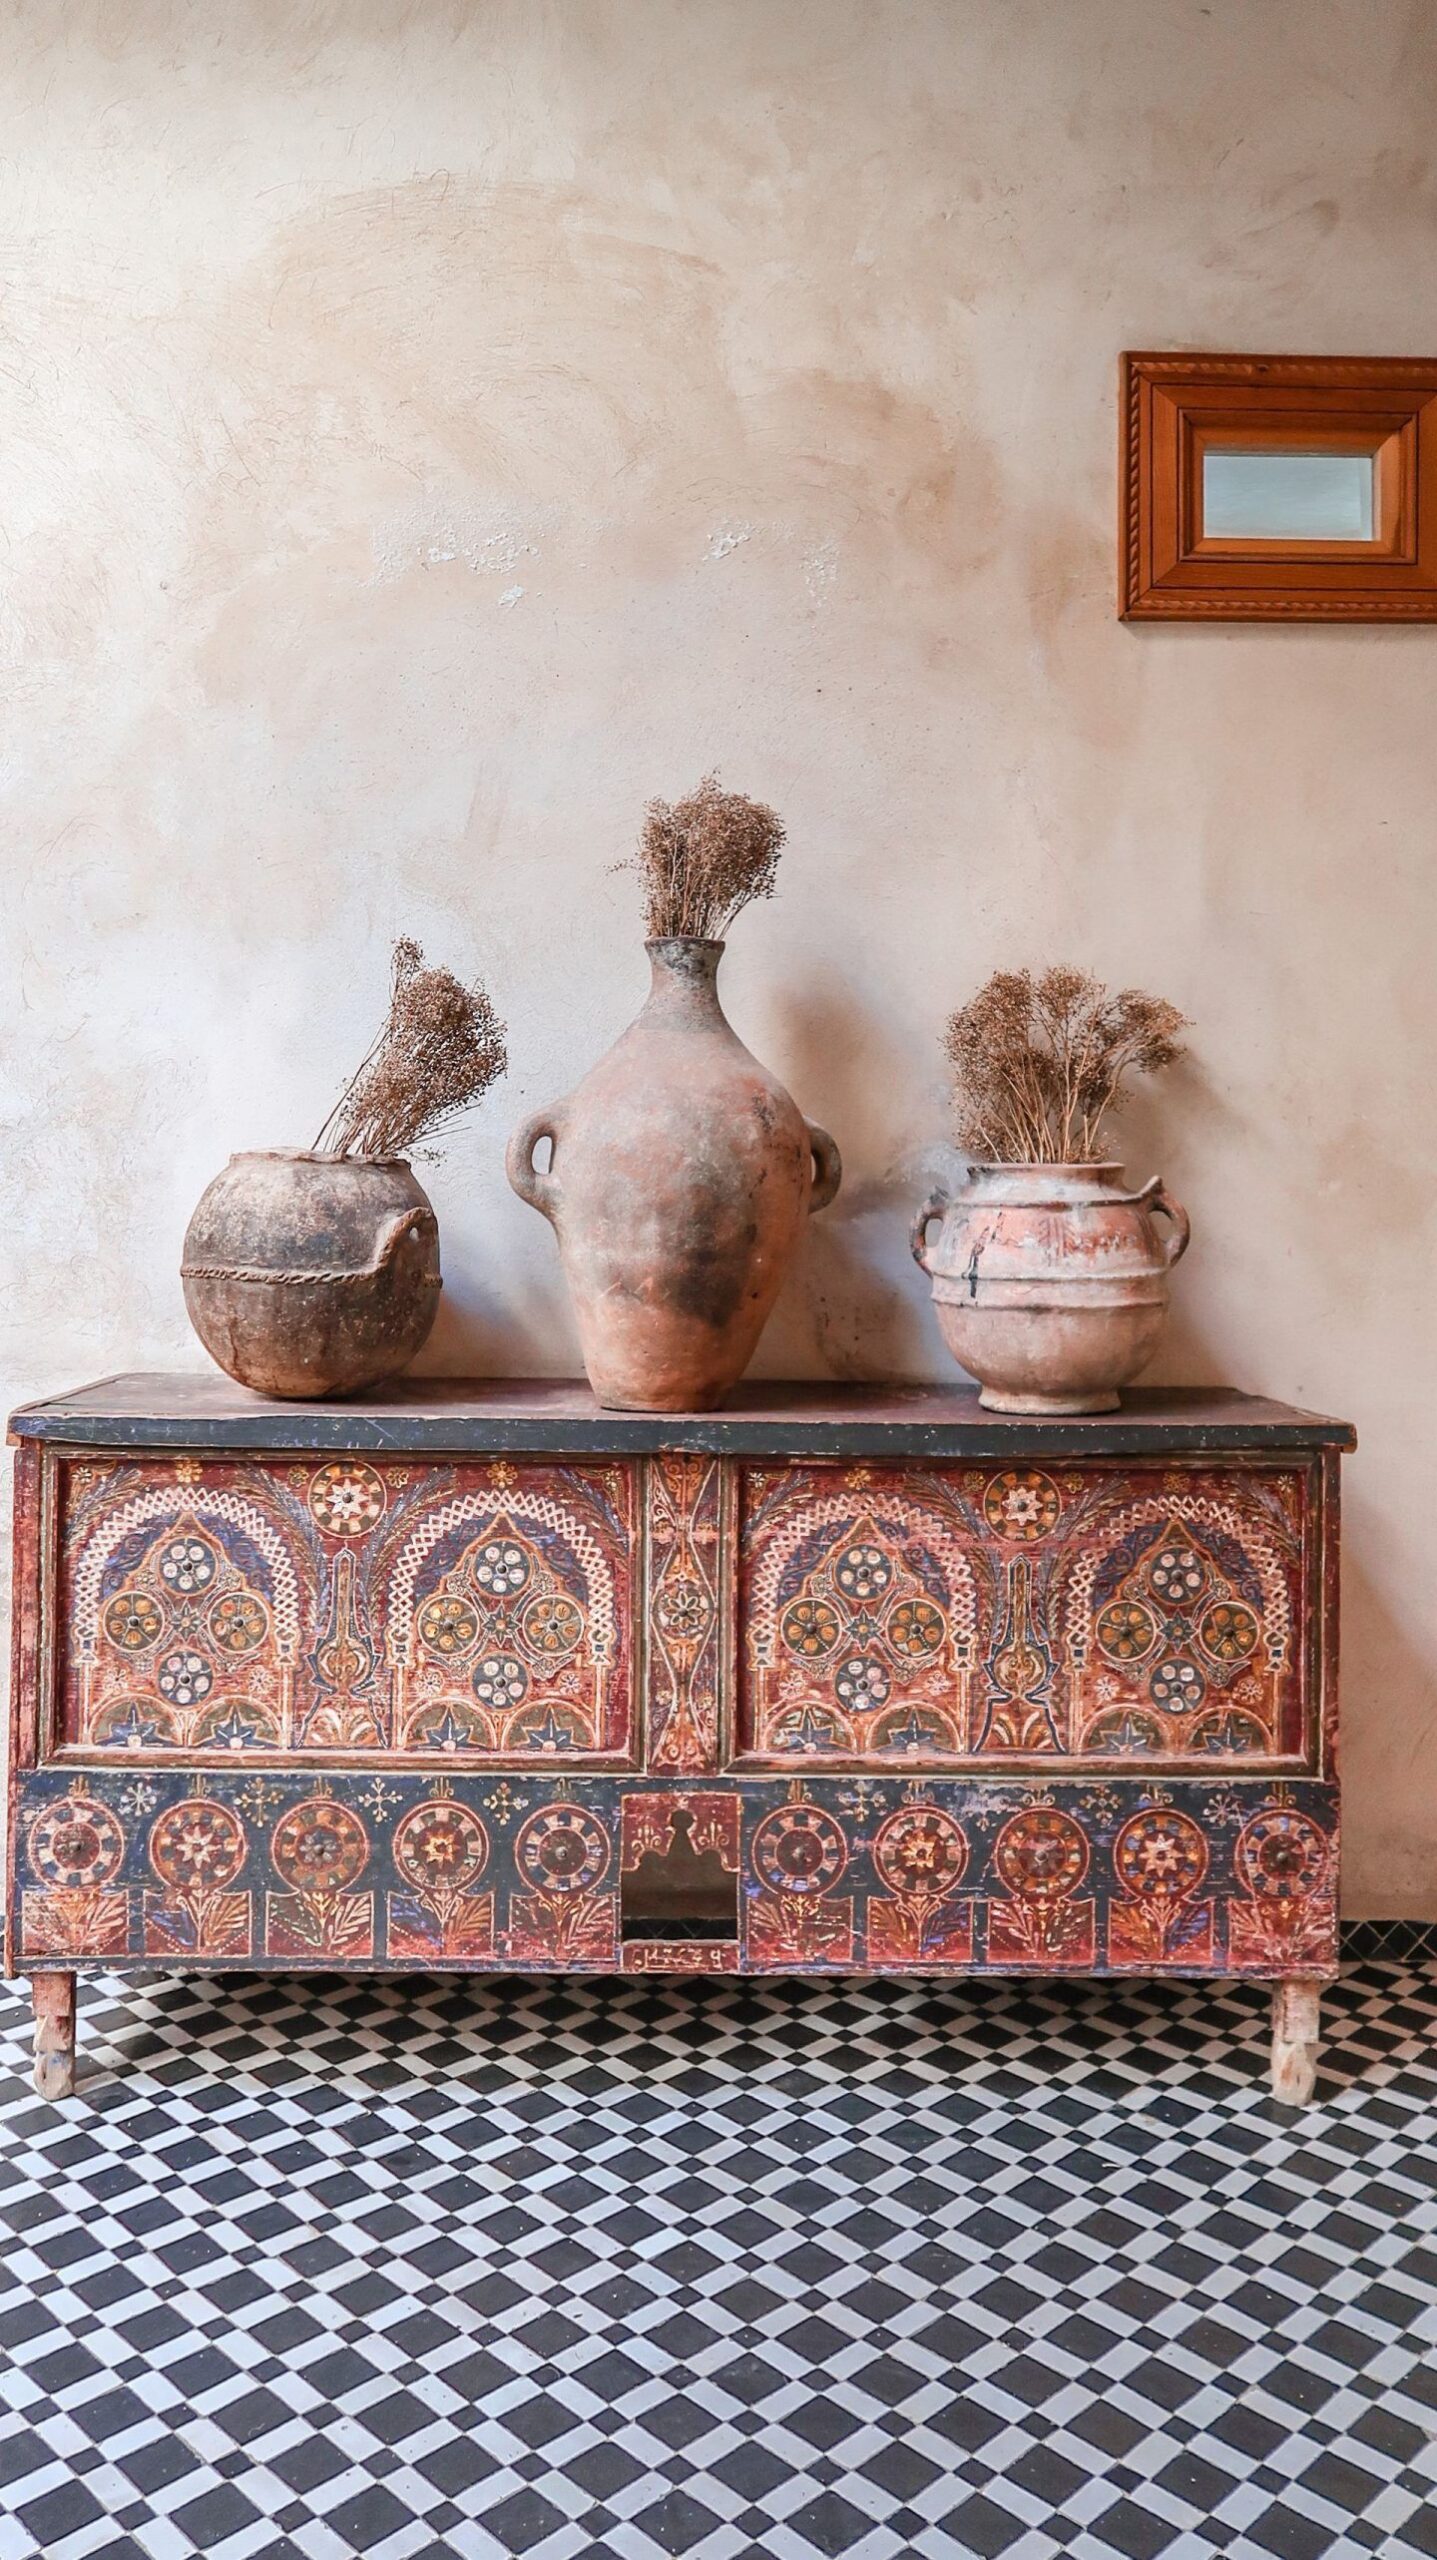 Moroccan Furniture Makes a Real Display  of Arts